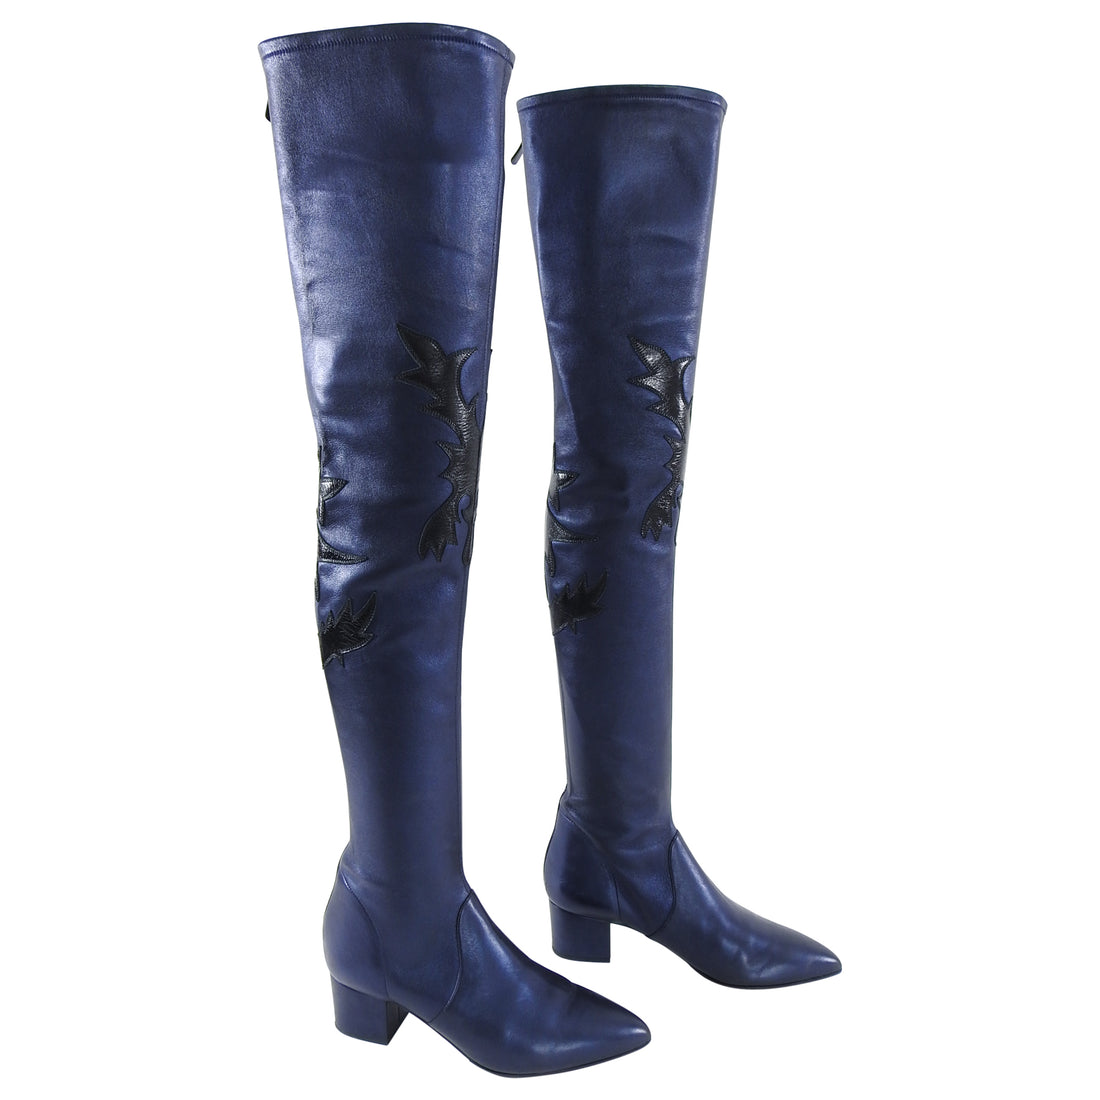 Chanel Thigh High Navy Dallas Collection Western Boots - 40 – I MISS